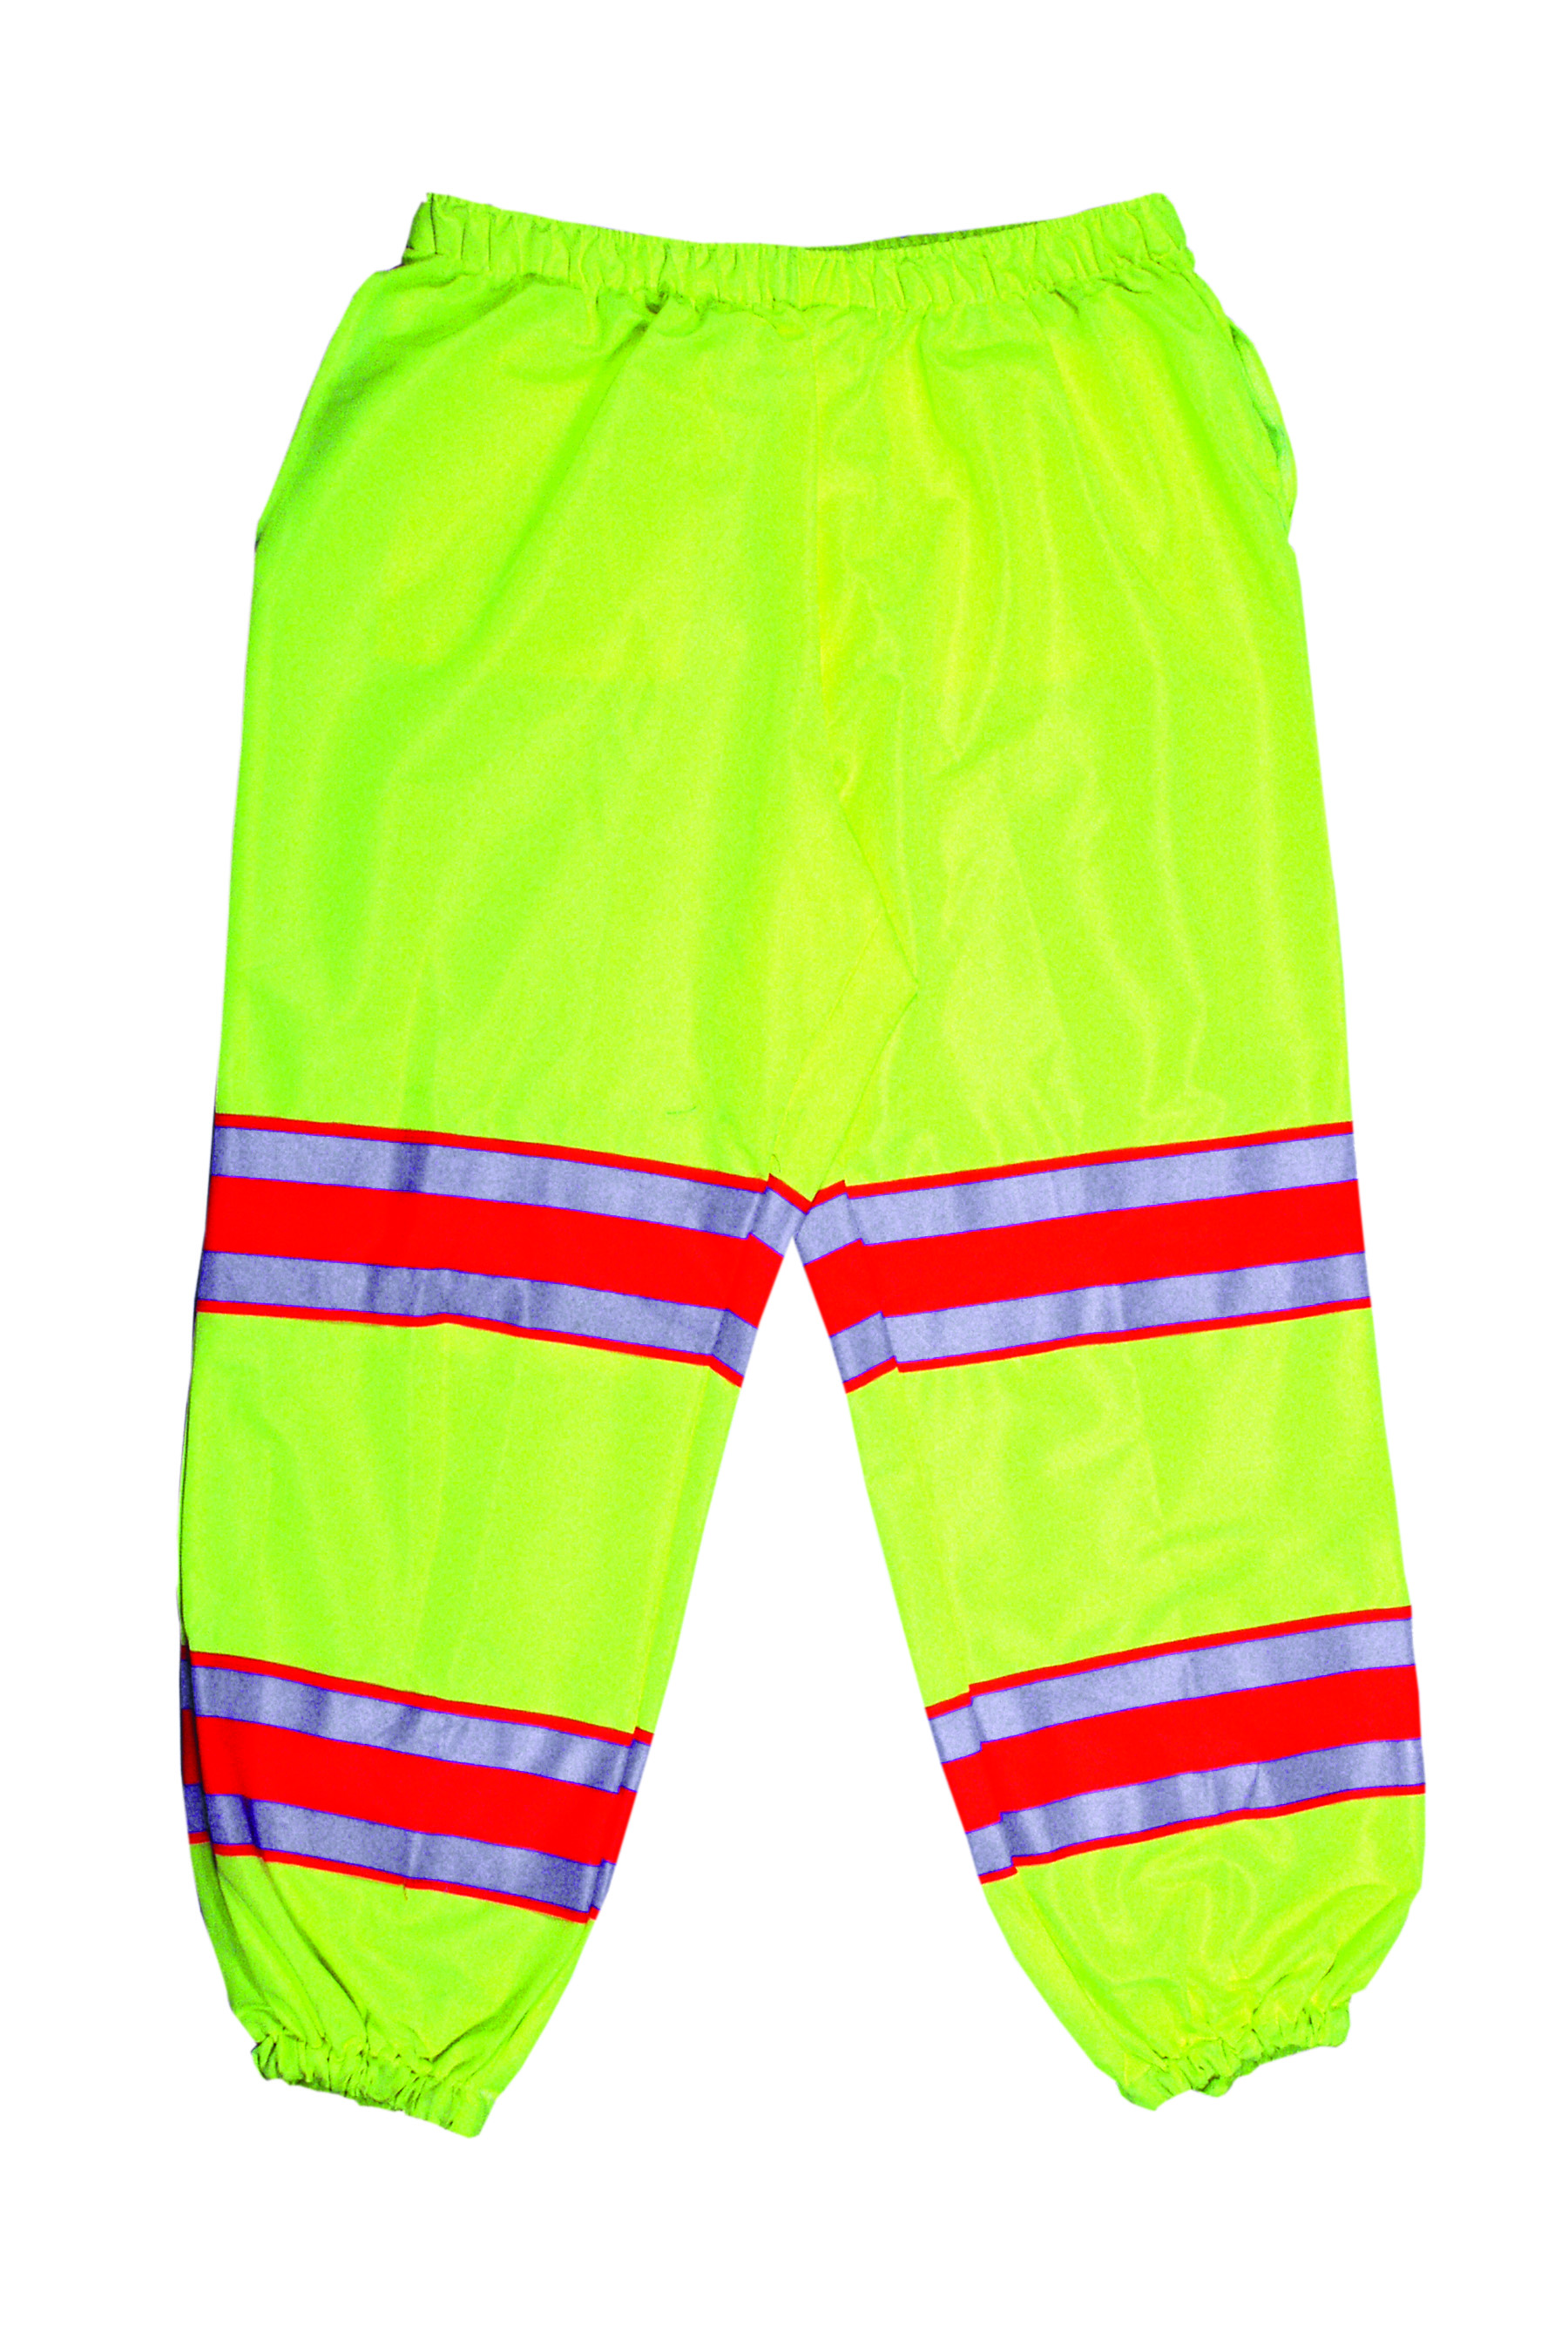 ANSI Class E Lime Pant w/Silver and Orange Reflective